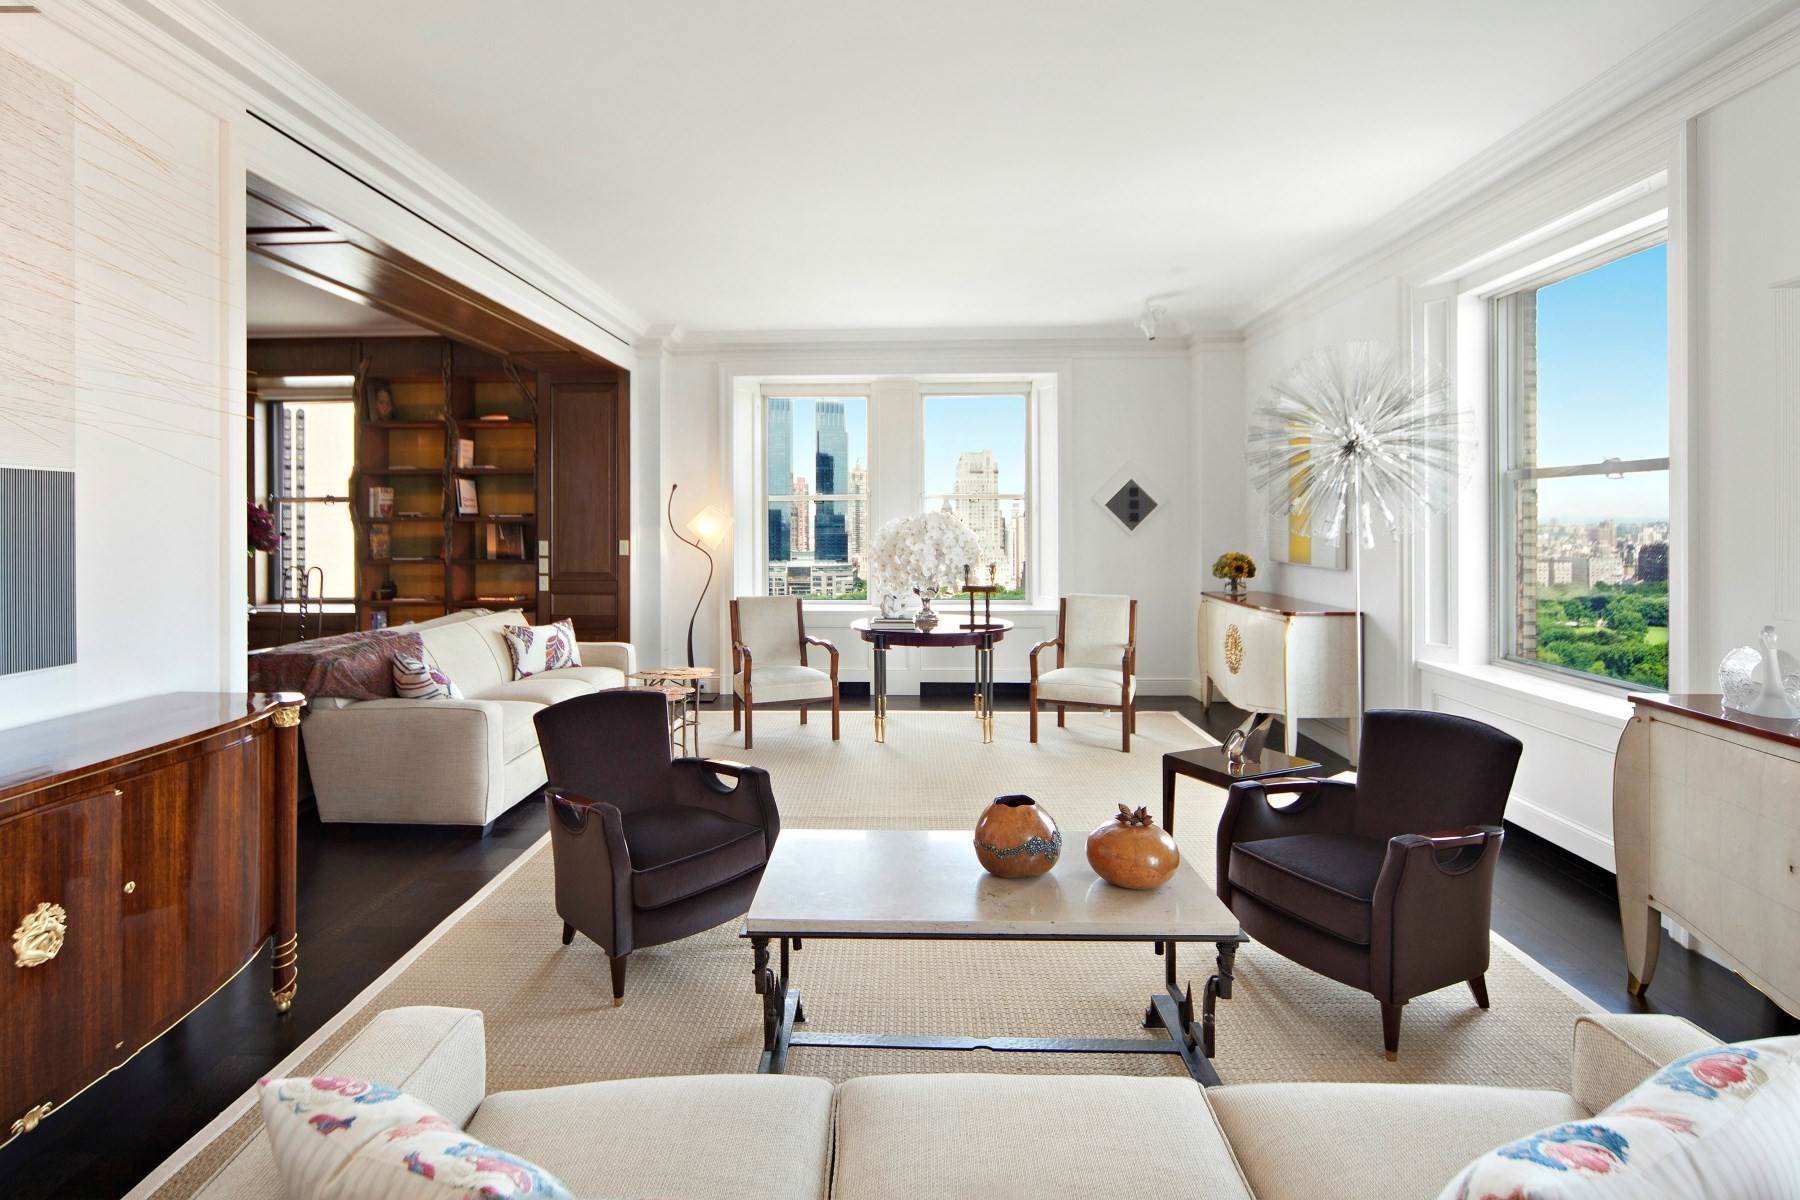 Co-op Properties for Sale at Pierre Hotel Perfection 795 Fifth Avenue, Apt 30/31 New York, New York 10065 United States